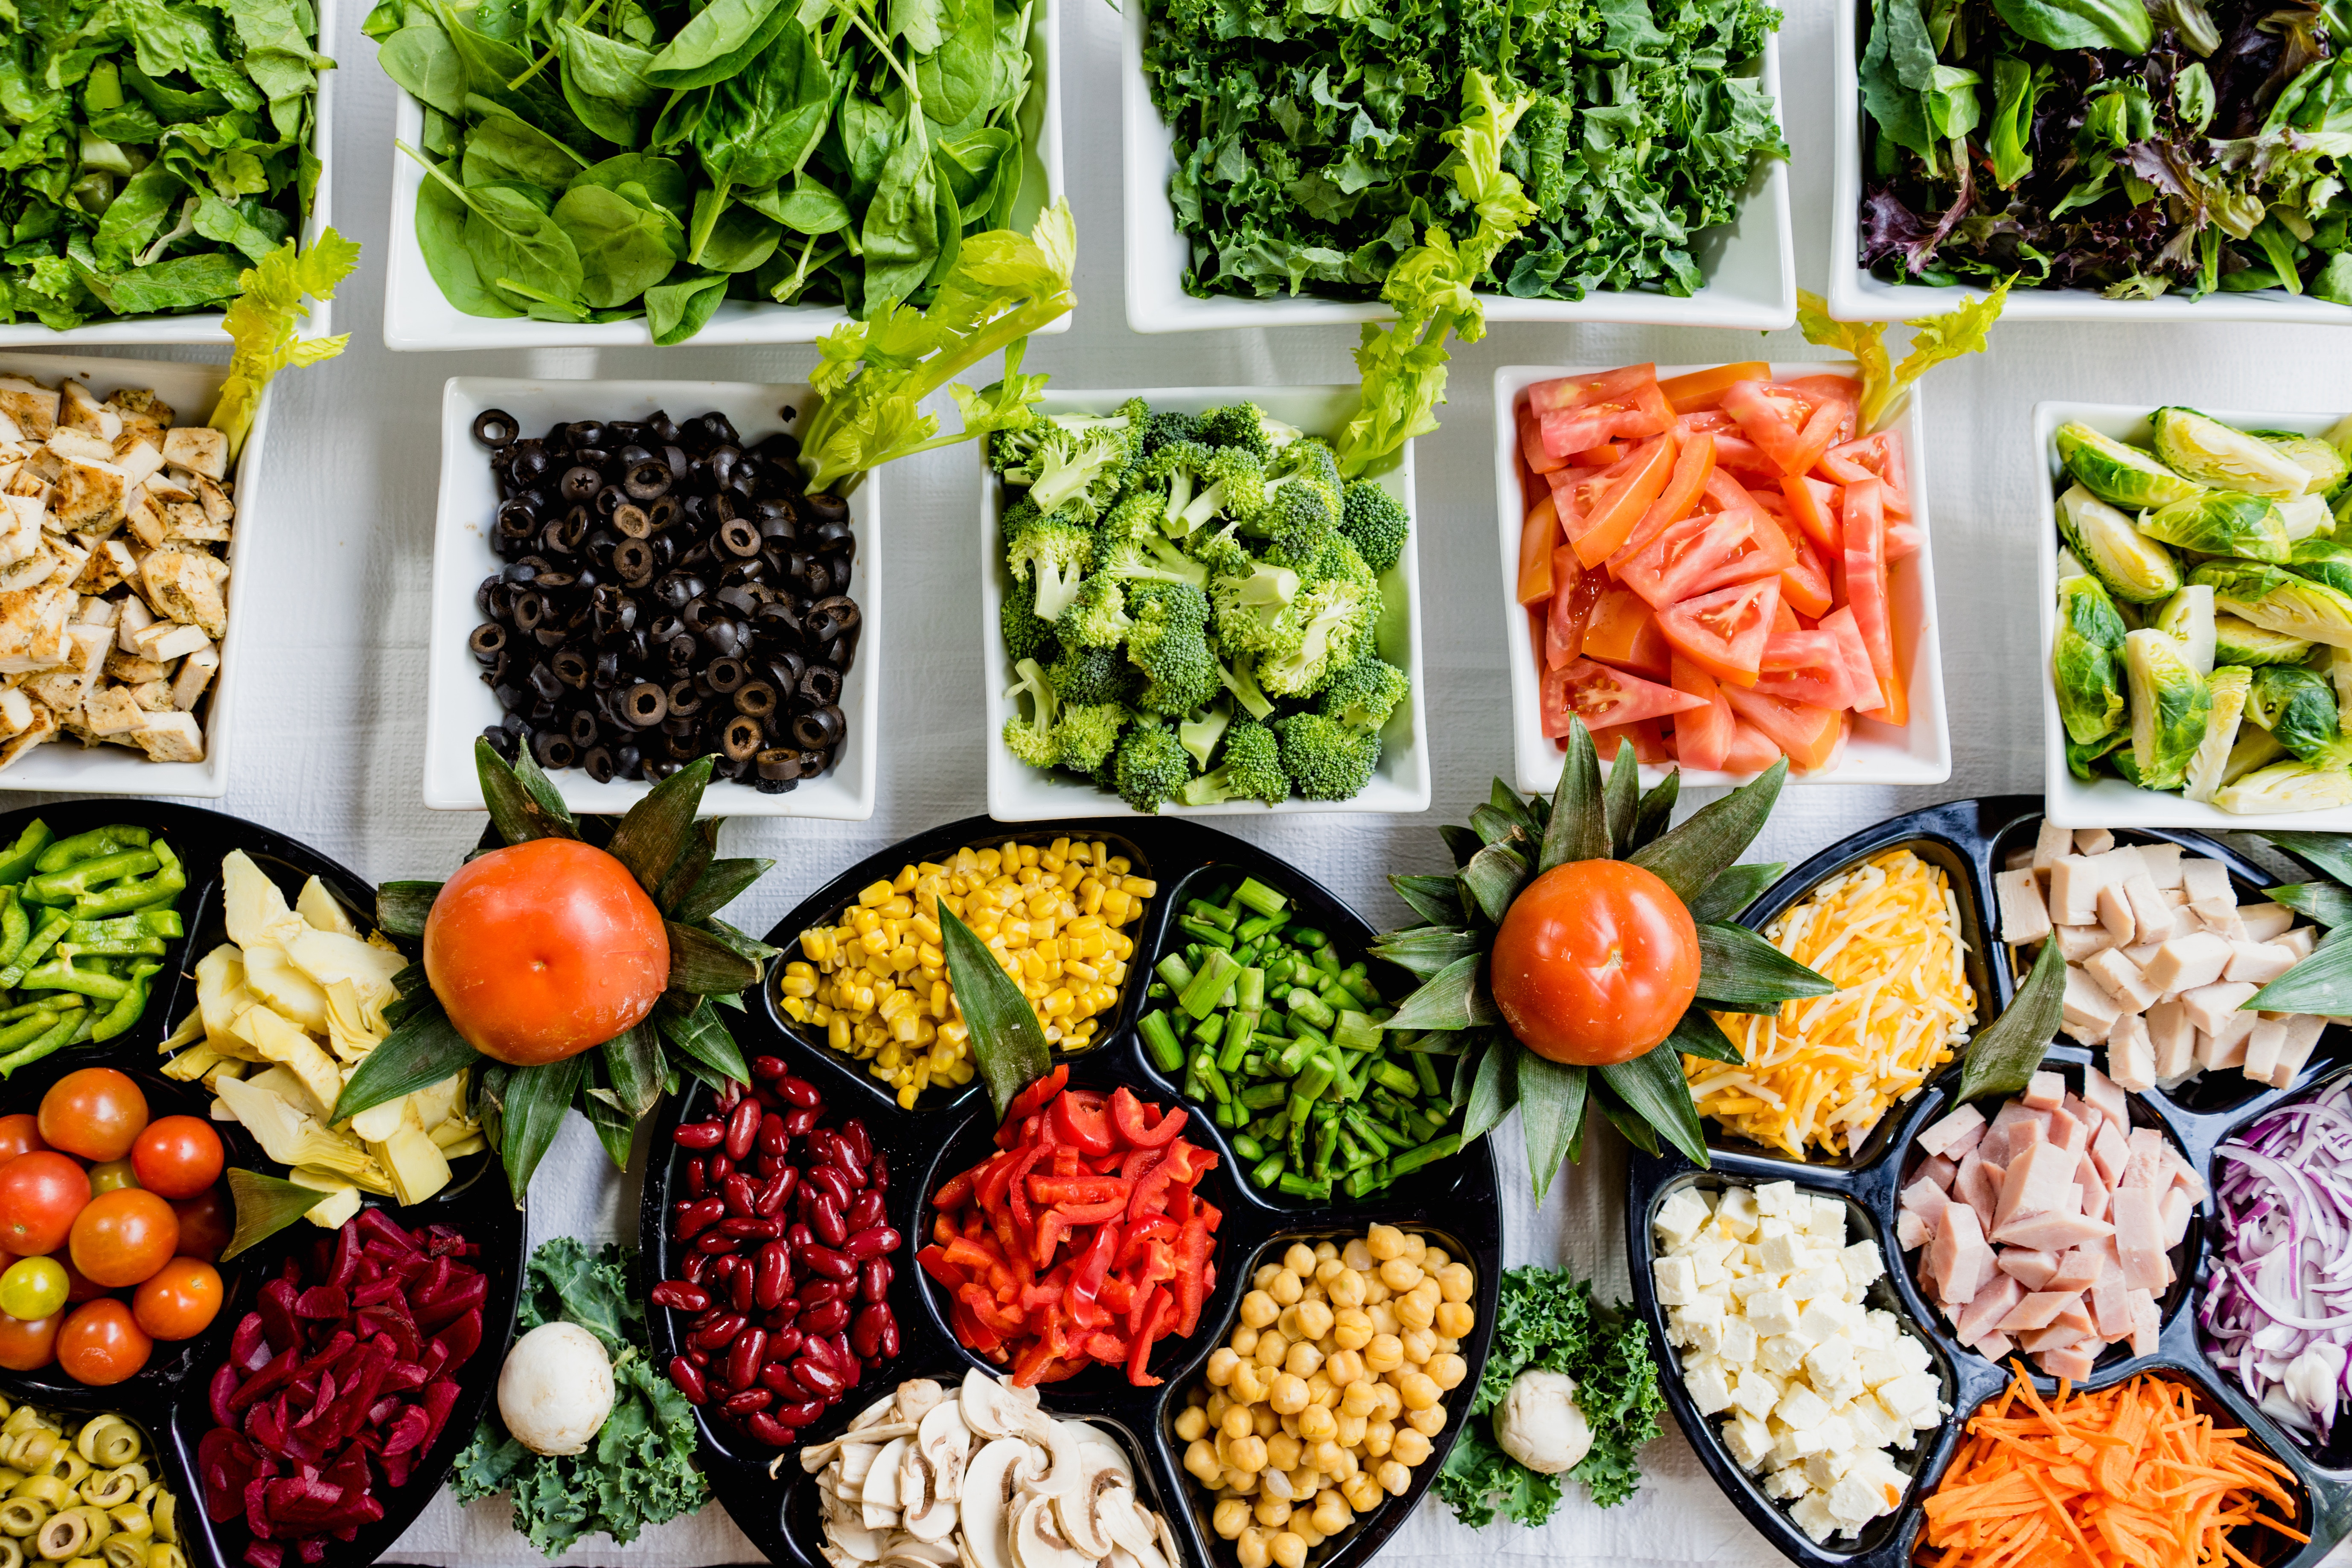 Salad bar filled with colorful vegetables and ingredients